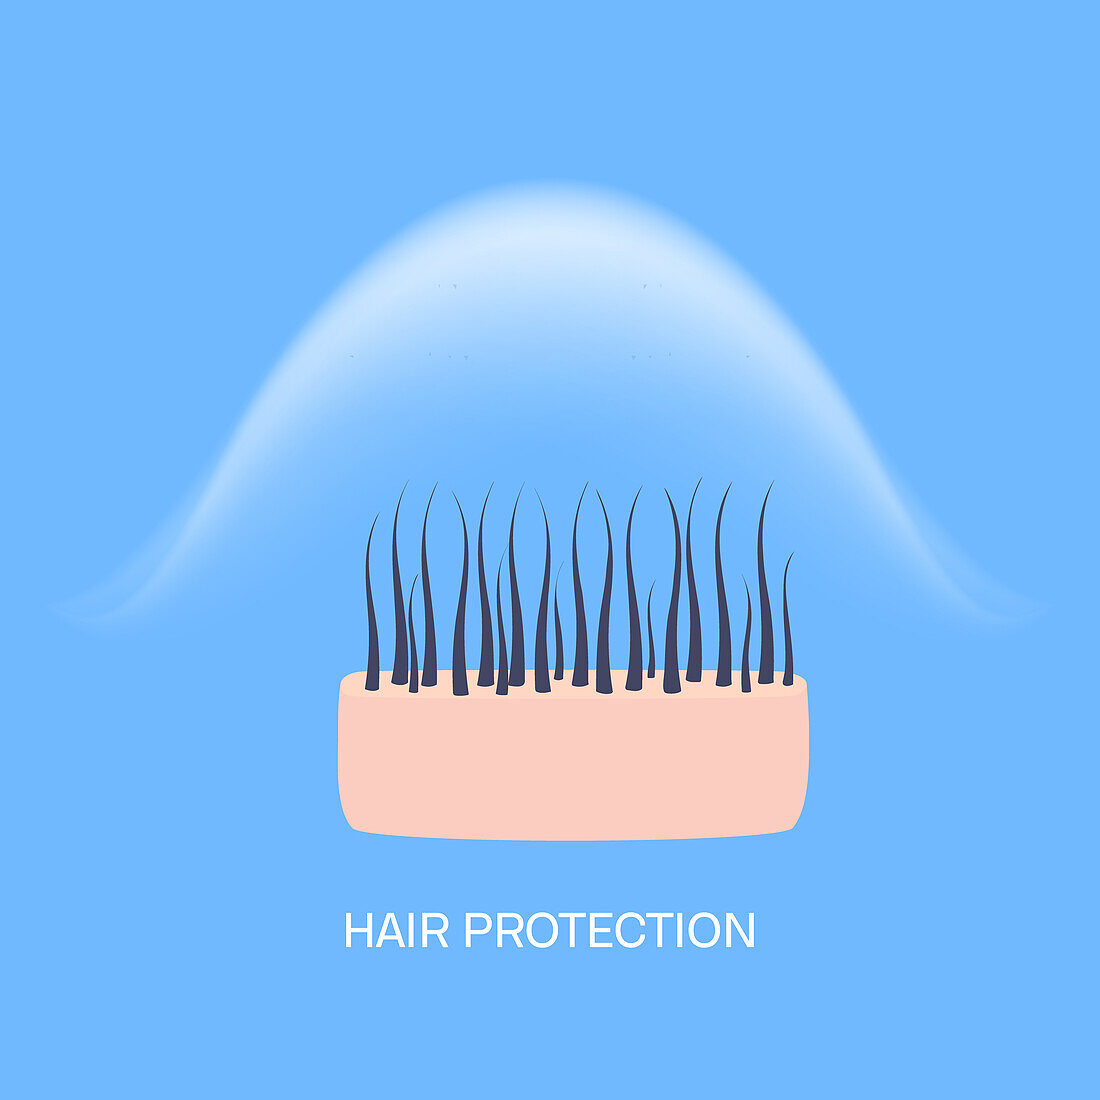 Hair protection, conceptual illustration